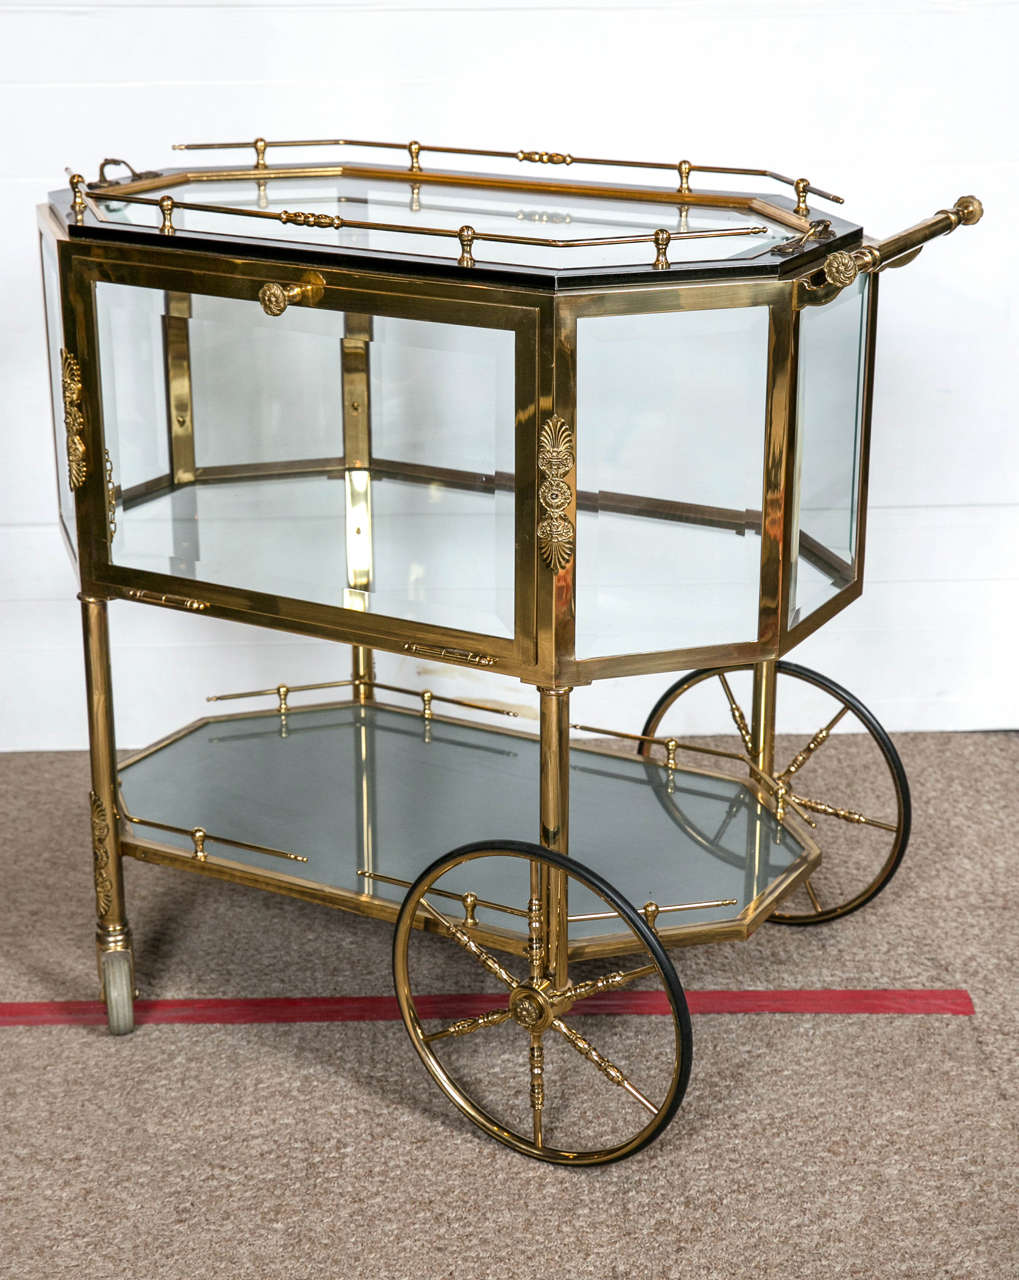 Beveled glass bronze tea wagon or serving cart. This wonderful Hollywood Regency style cart has small wheels in front with large wheels in back supporting a brass and bronze-mounted column form set of legs. The lower brass galleried glass shelf